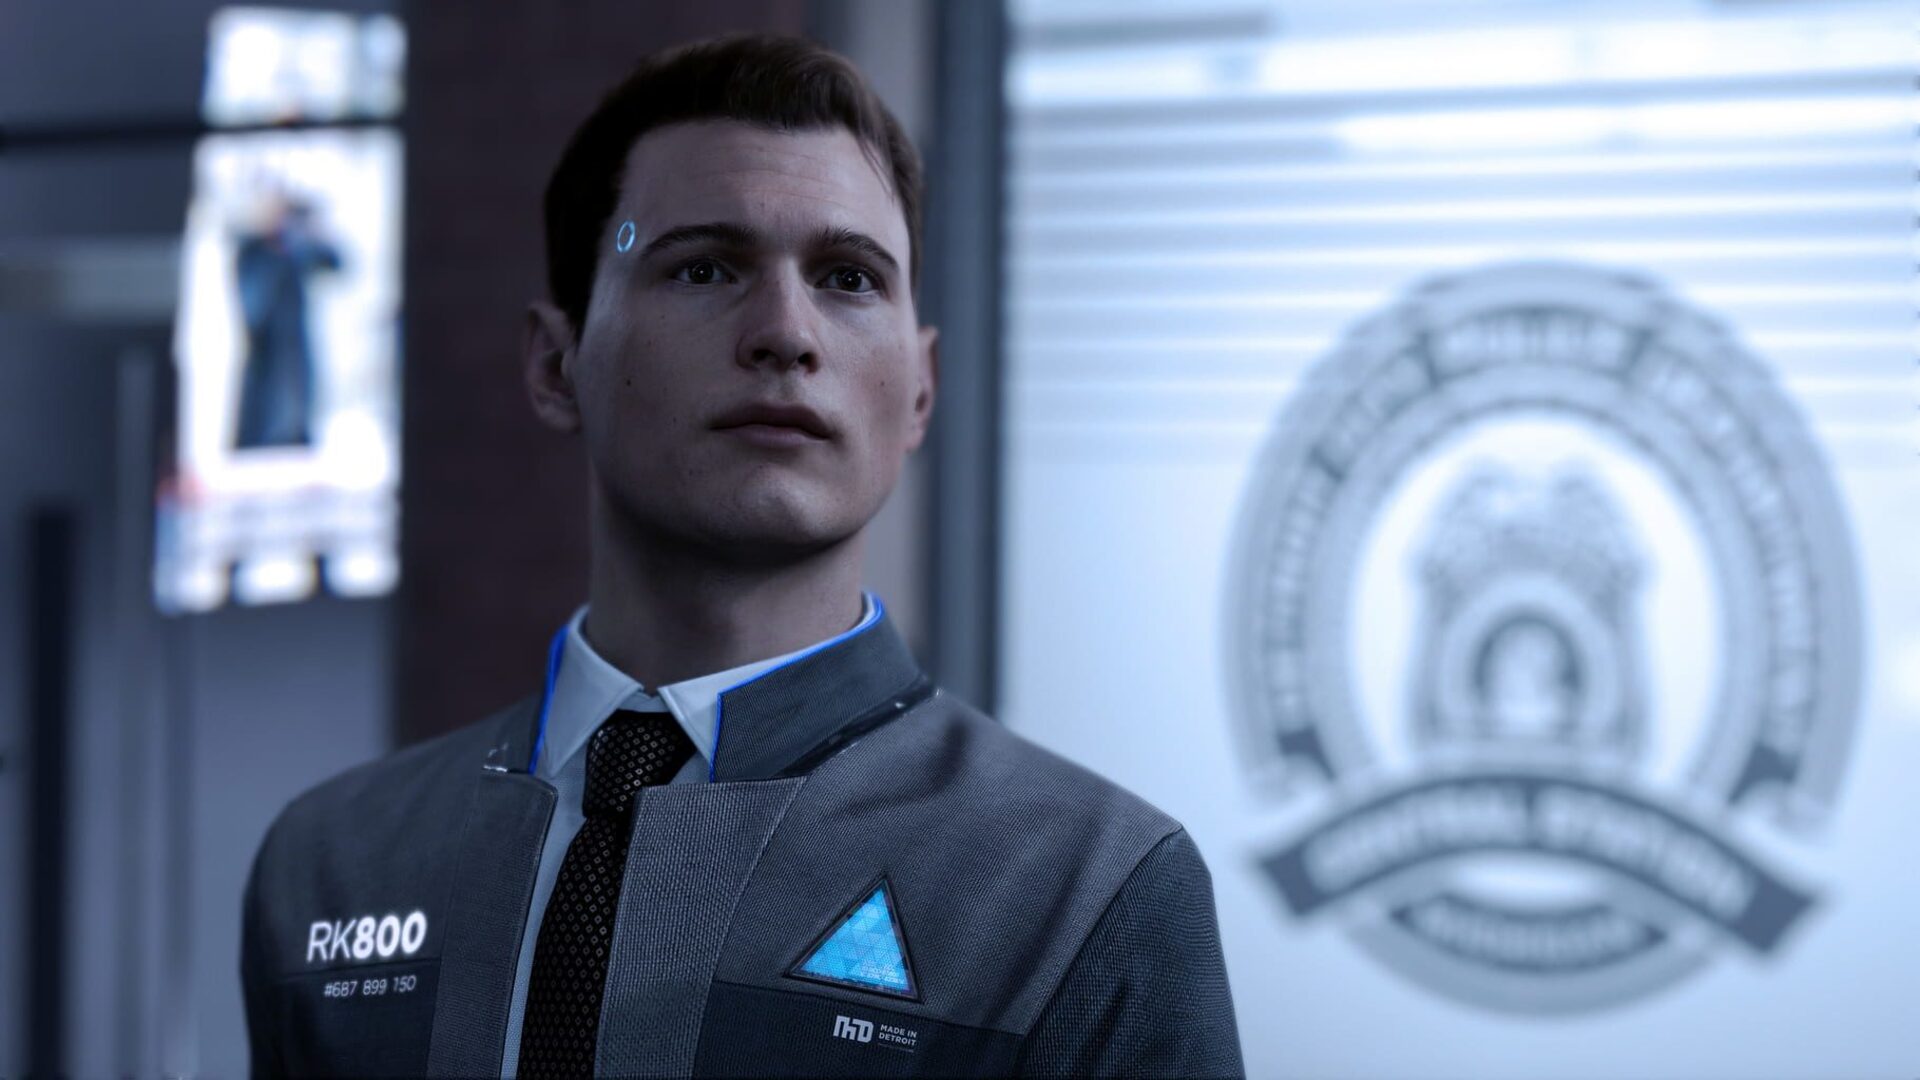 Detroit: Become Human PC (Steam)